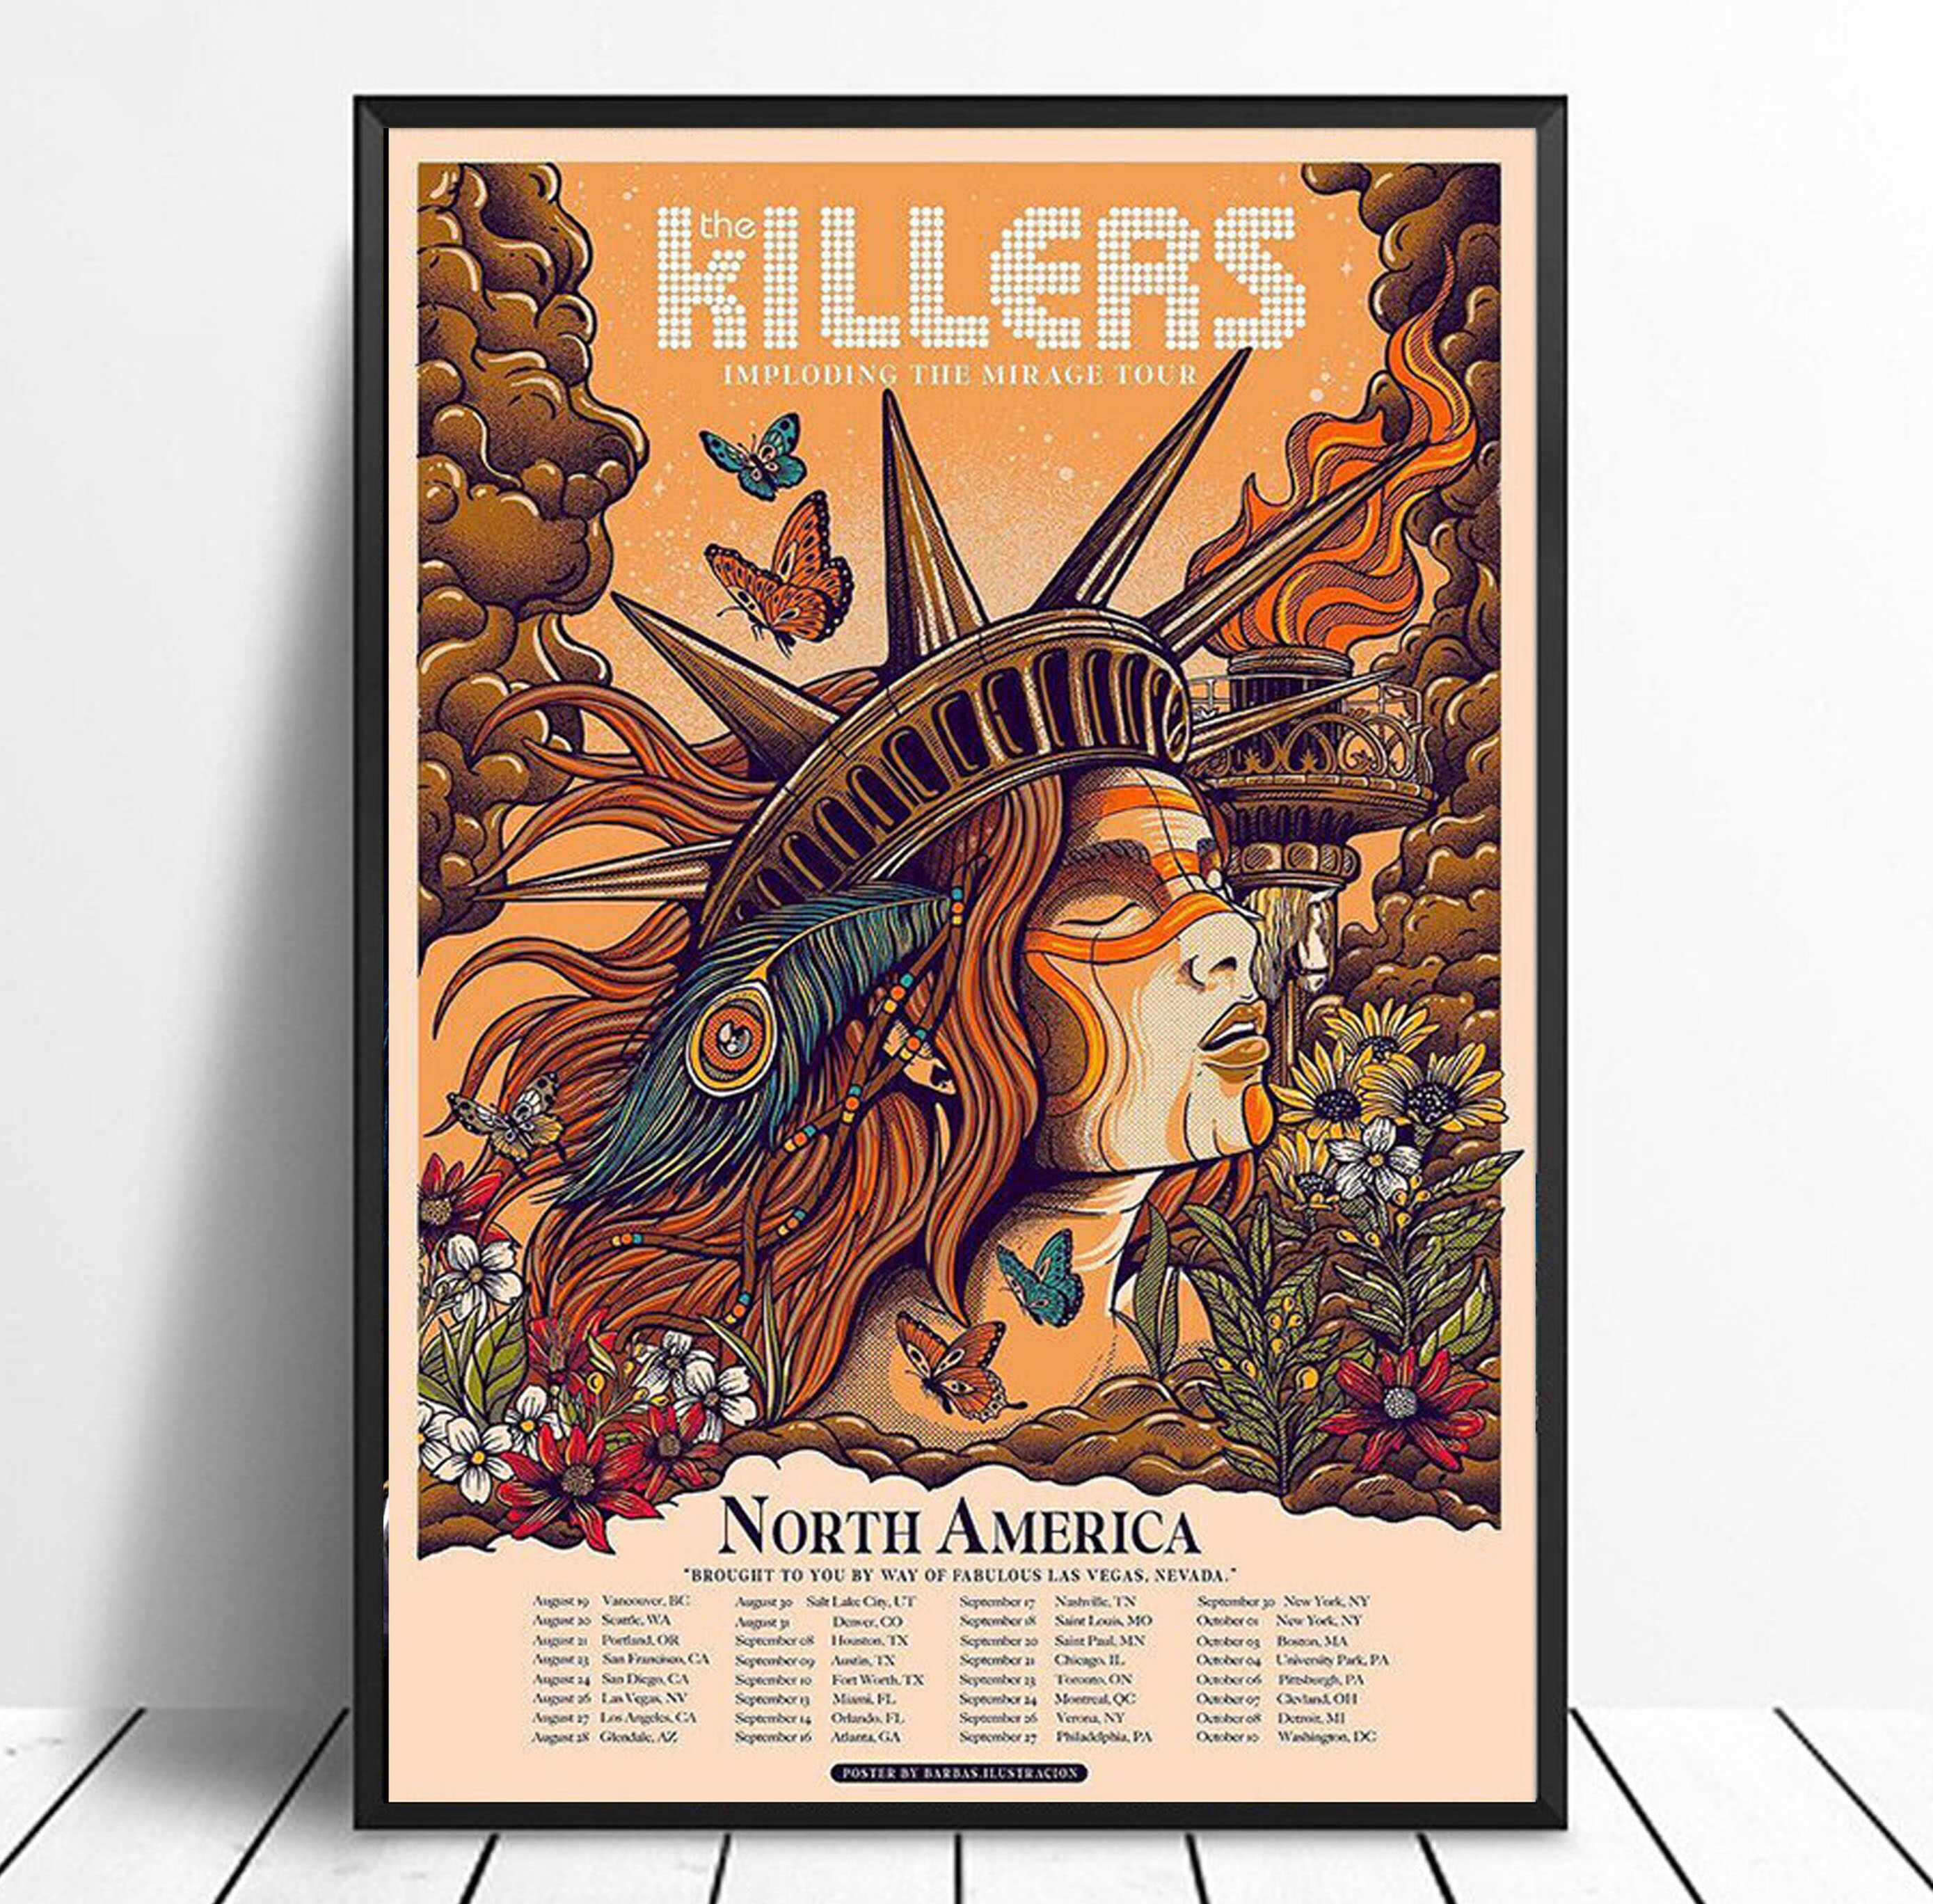 Imploding The Mirage Tour 2022- The Killers North American 2022 Tour Poster